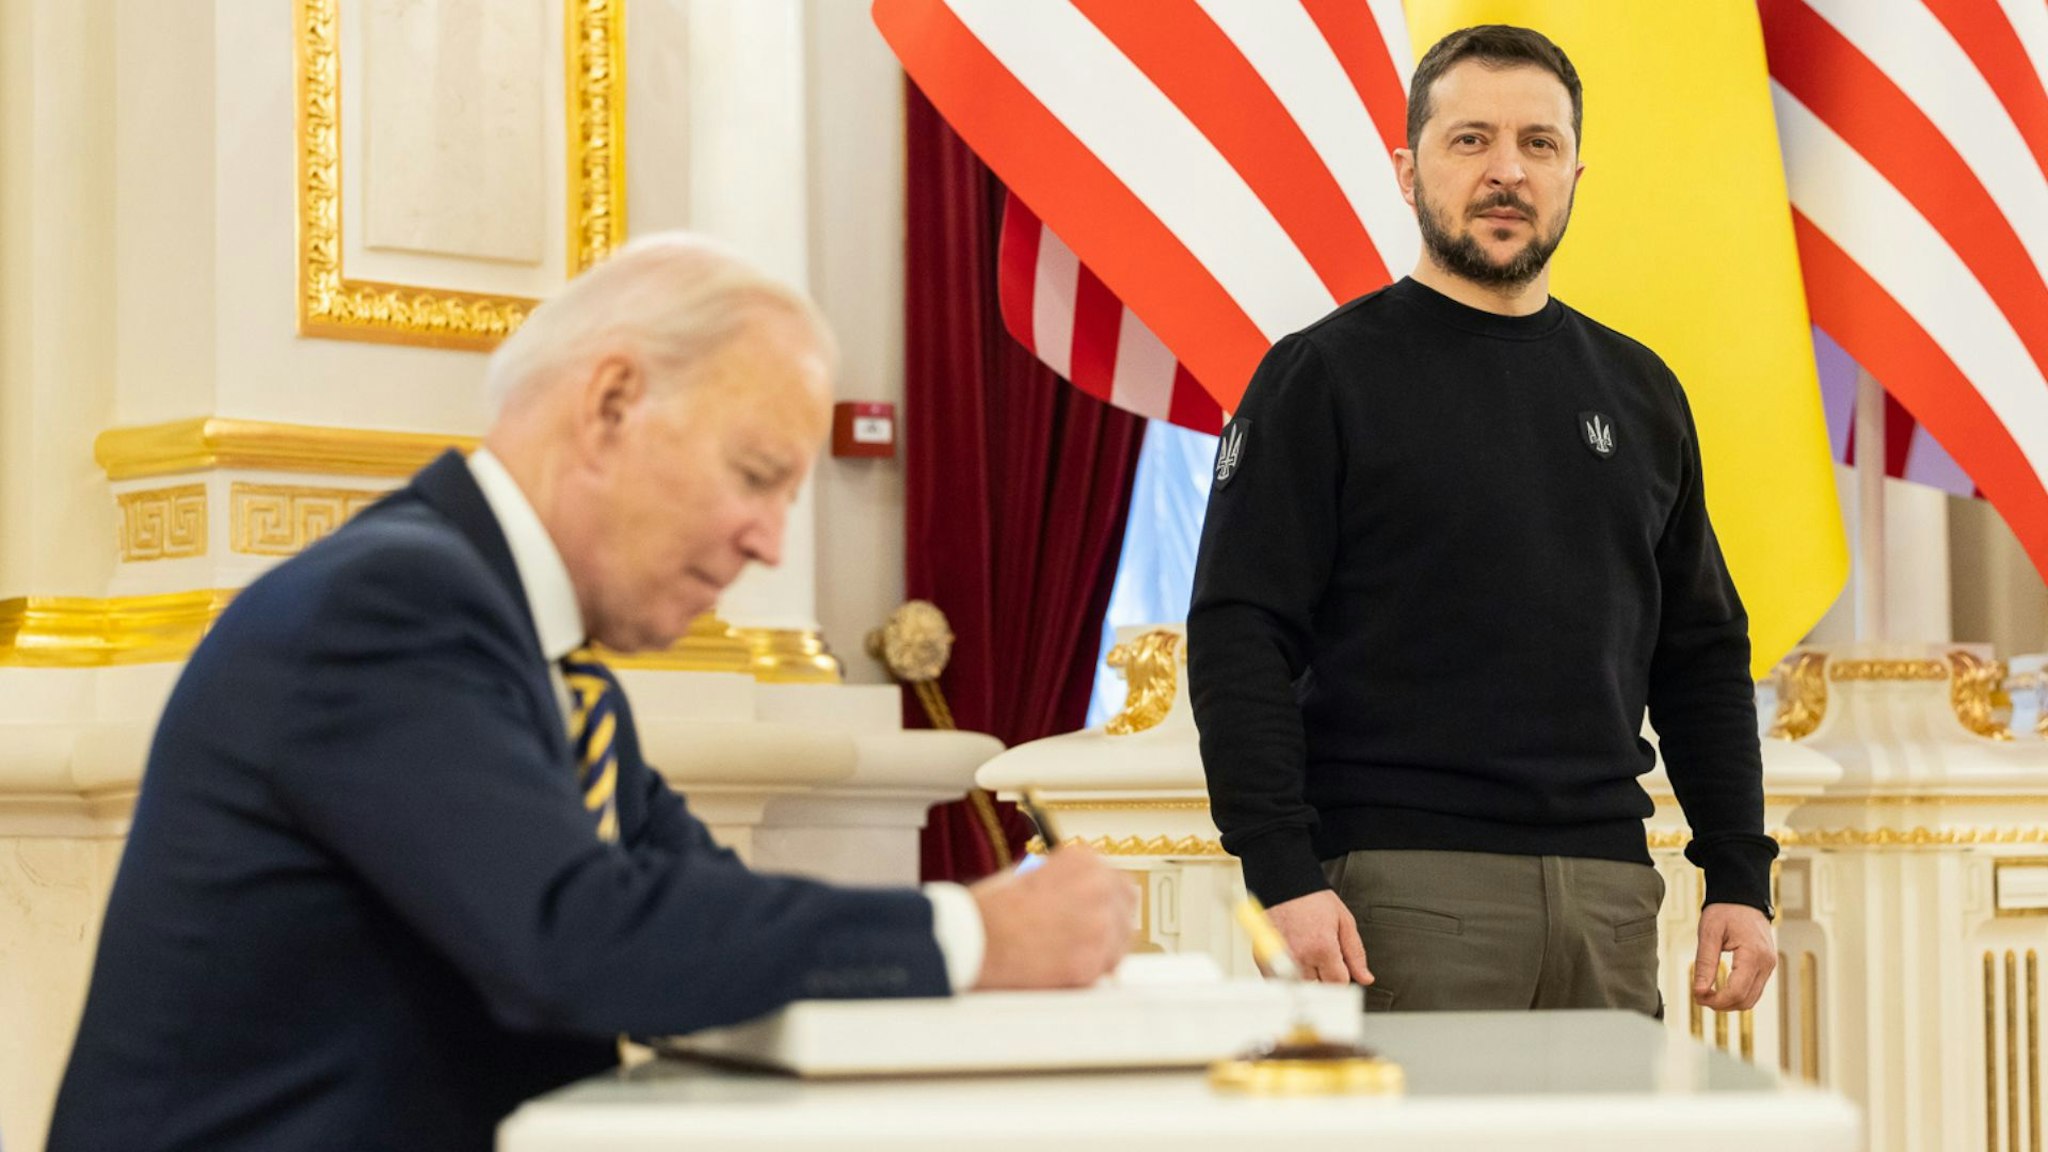 KYIV, UKRAINE - FEBRUARY 20: In this handout photo issued by the Ukrainian Presidential Press Office, U.S. President Joe Biden signs the guest book during a meeting with Ukrainian President Volodymyr Zelensky at the Ukrainian presidential palace on February 20, 2023 in Kyiv, Ukraine.